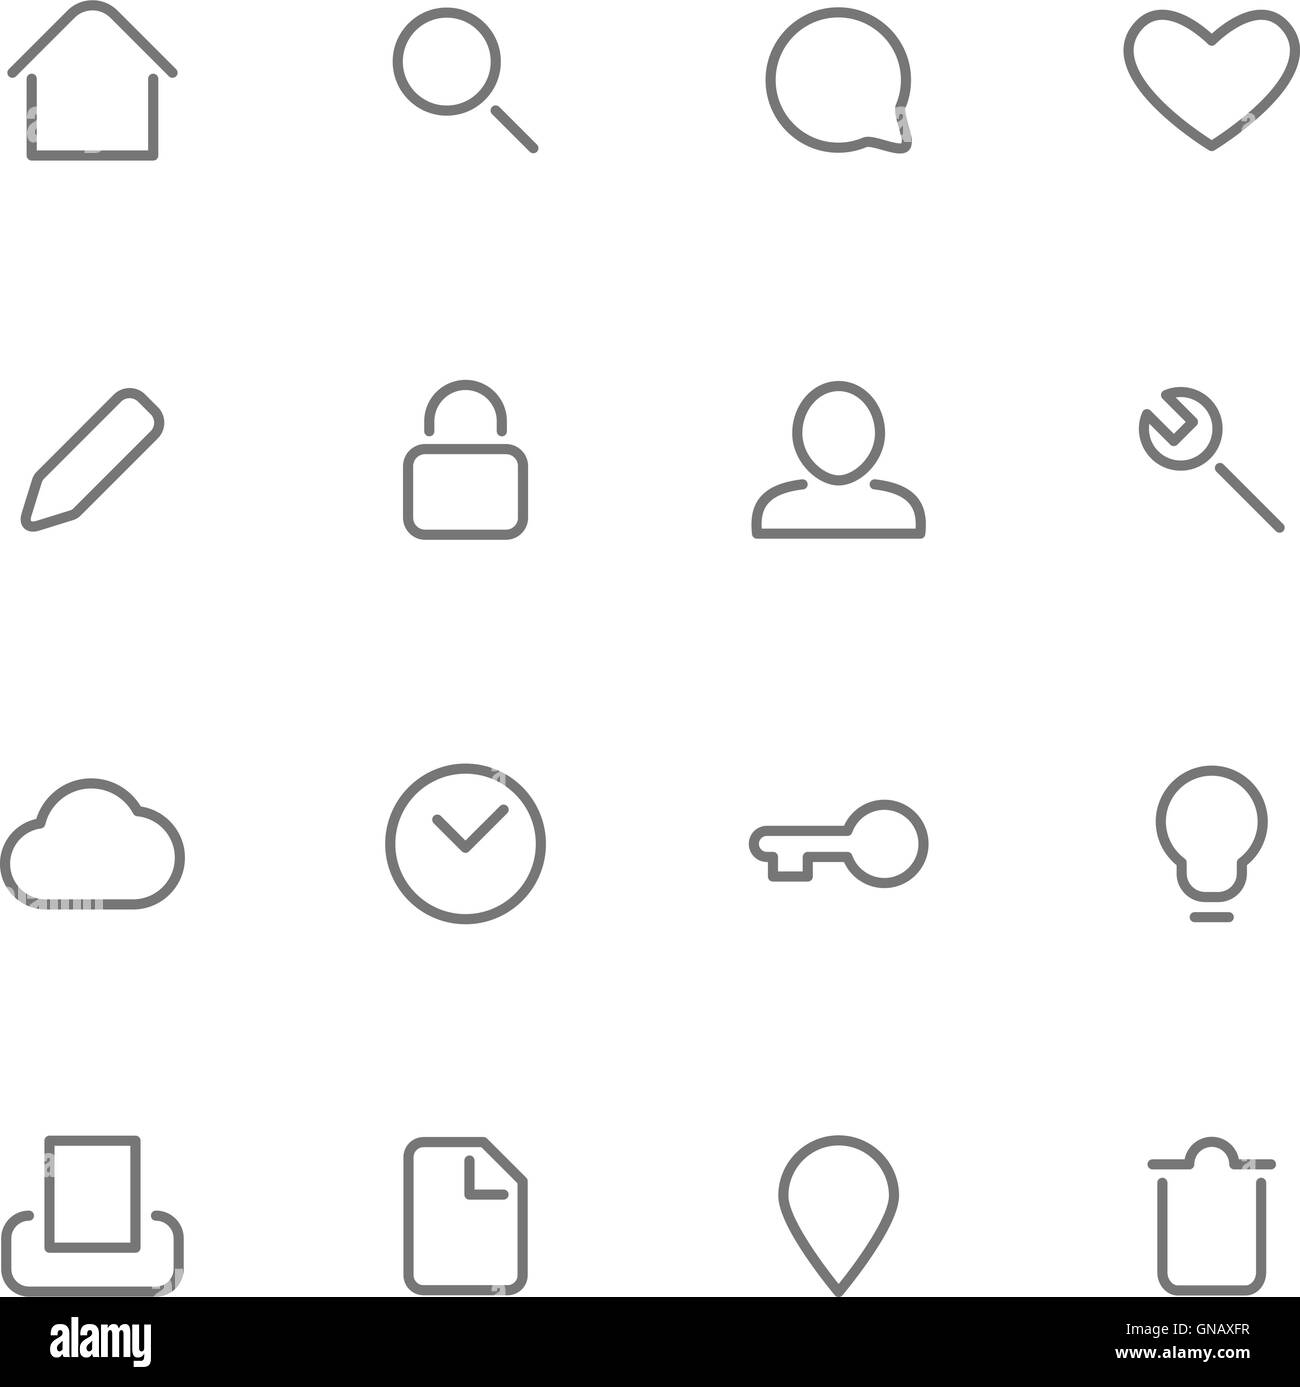 Vector icons. Set of simple signs and buttons. Stock Vector